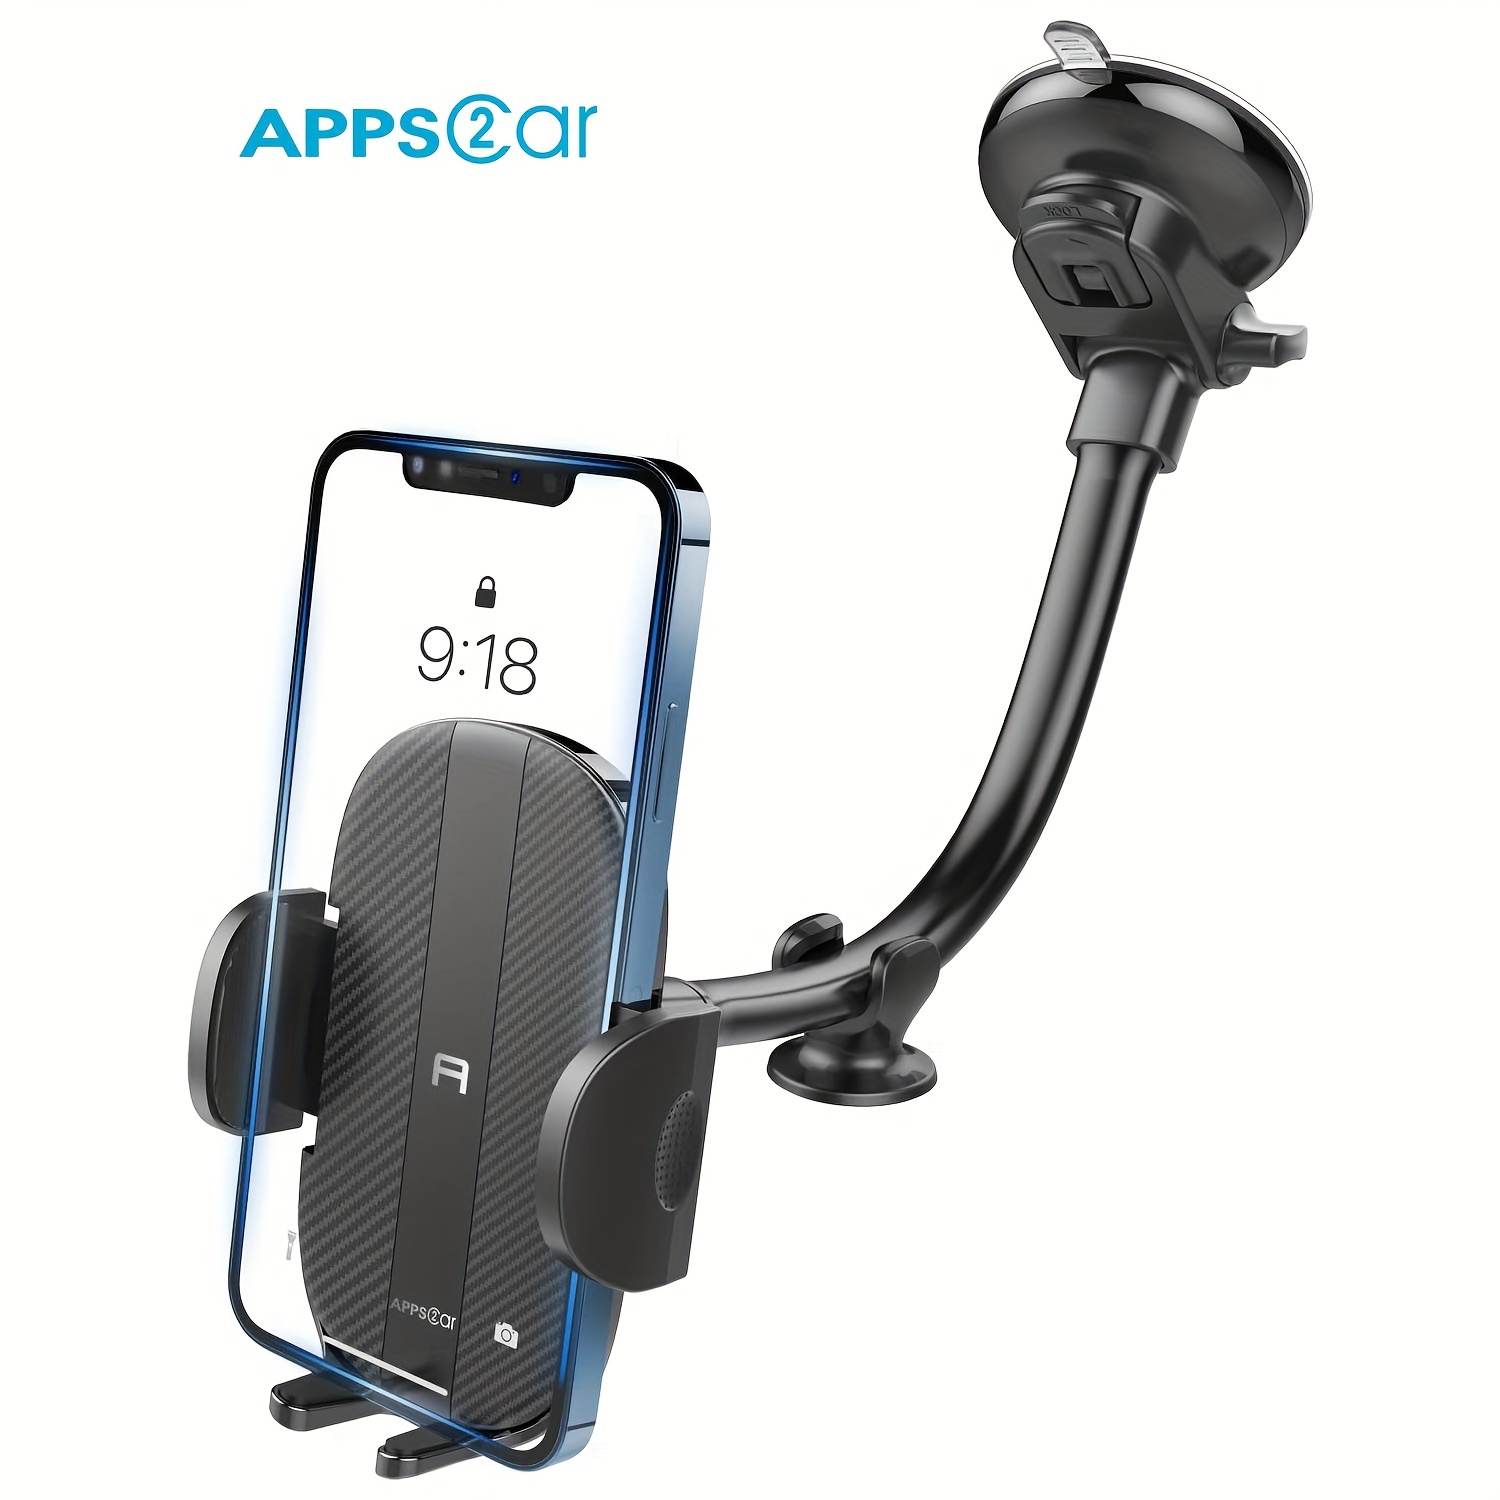 

Apps2car Cell Phone Holder For Car [2 Colors Shipped Randomly] Phone Mount For Car Long Arm Car Phone Holder Mount Strong Suction Cup Anti-shake Stabilizer For All Smartphones.